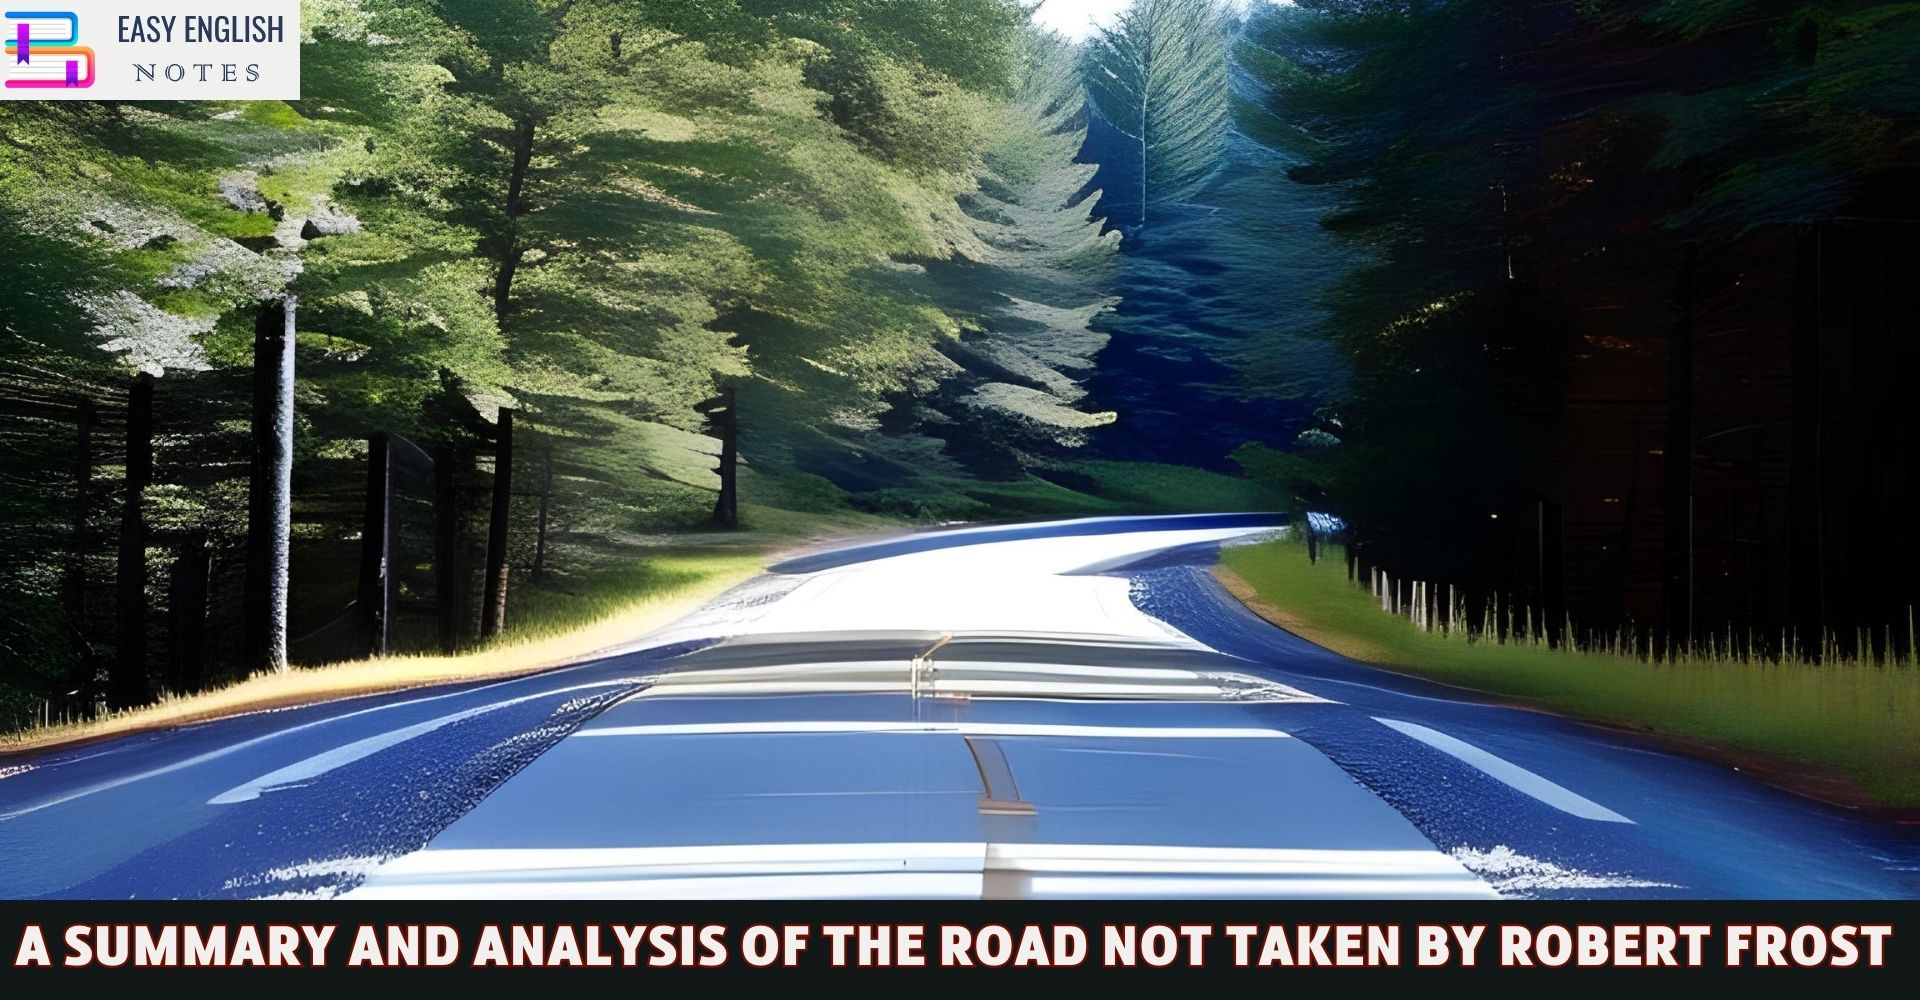 A Summary And Analysis of The Road Not Taken by Robert Frost